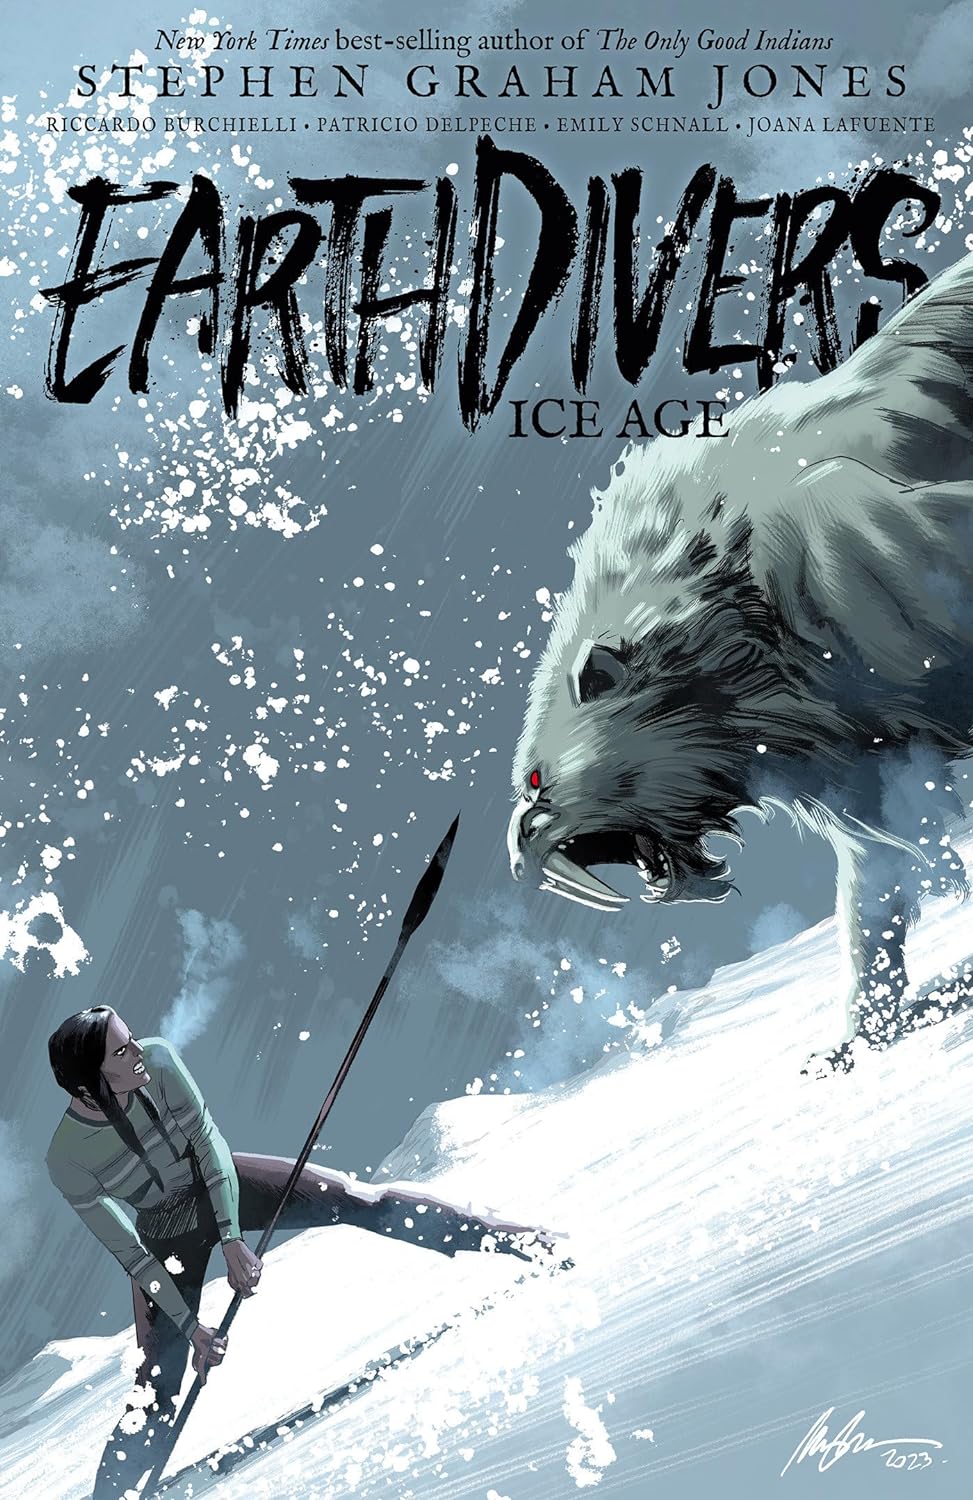 Earthdivers, Vol. 2: Ice Age by Stephen Graham Jones, illustrated by Riccardo Burchielli